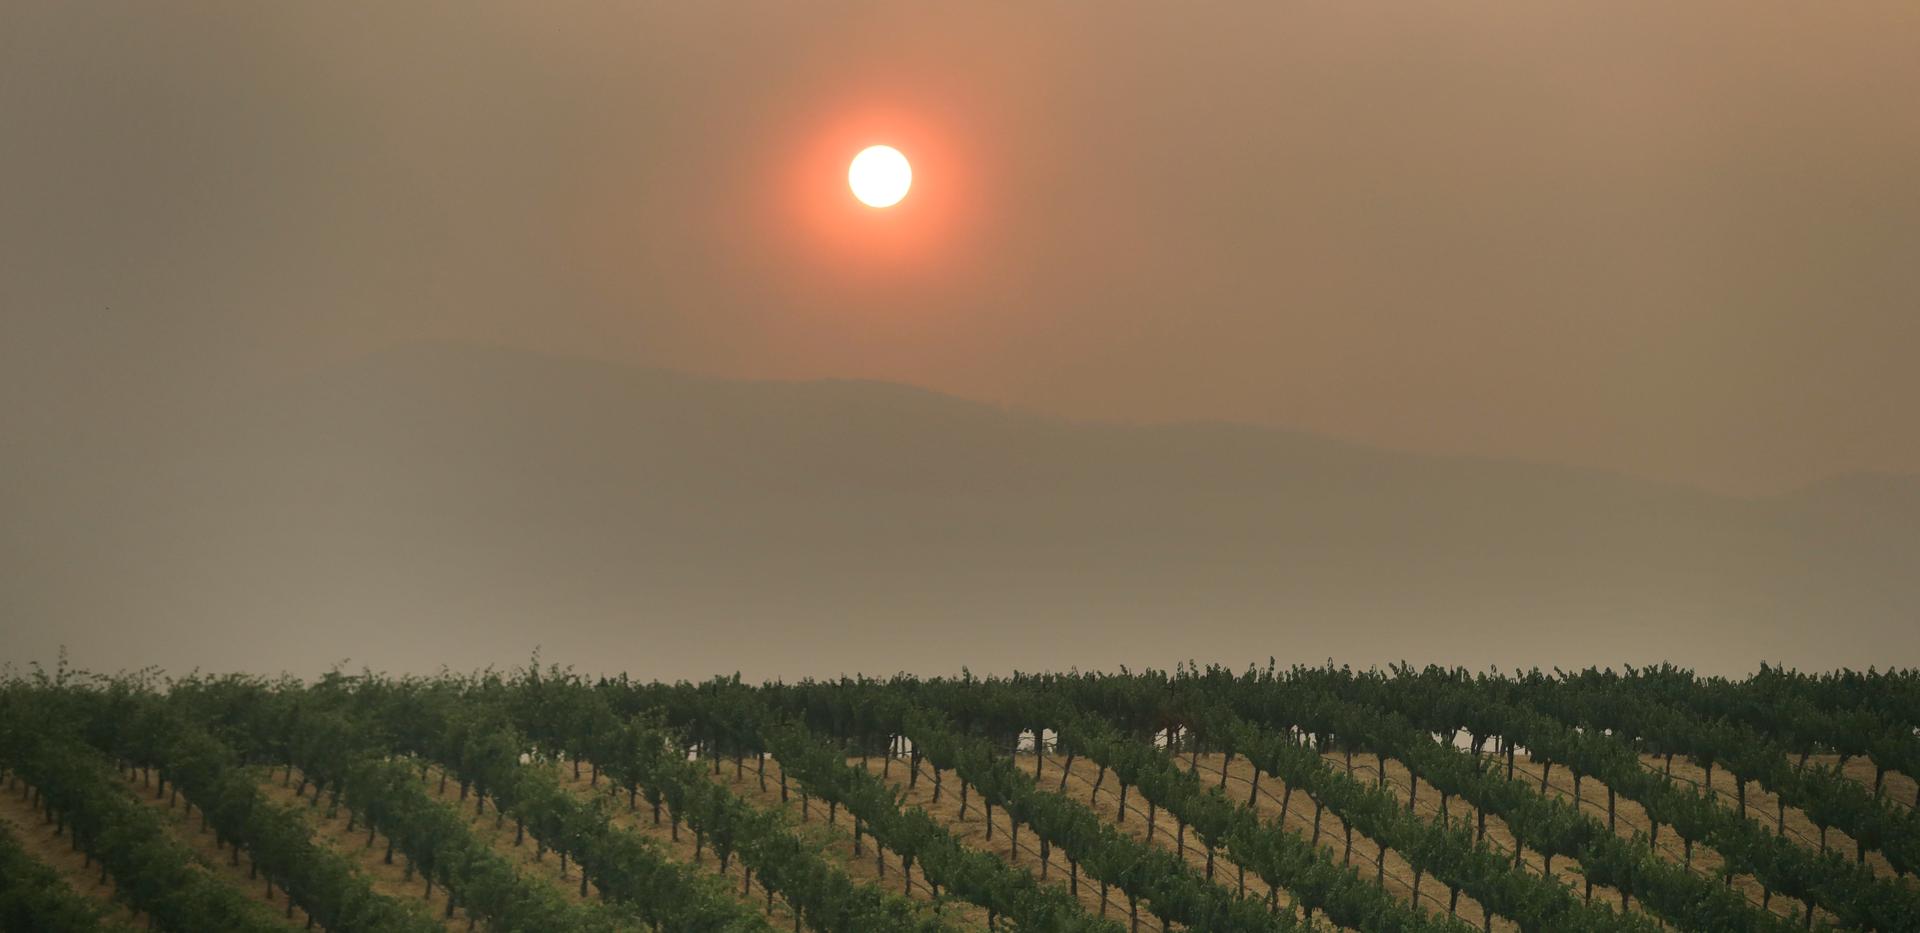 In this July 30, 2018, file photo, the setting sun is reddened by smoke from a wildfire over a vineyard, in Finley, California.